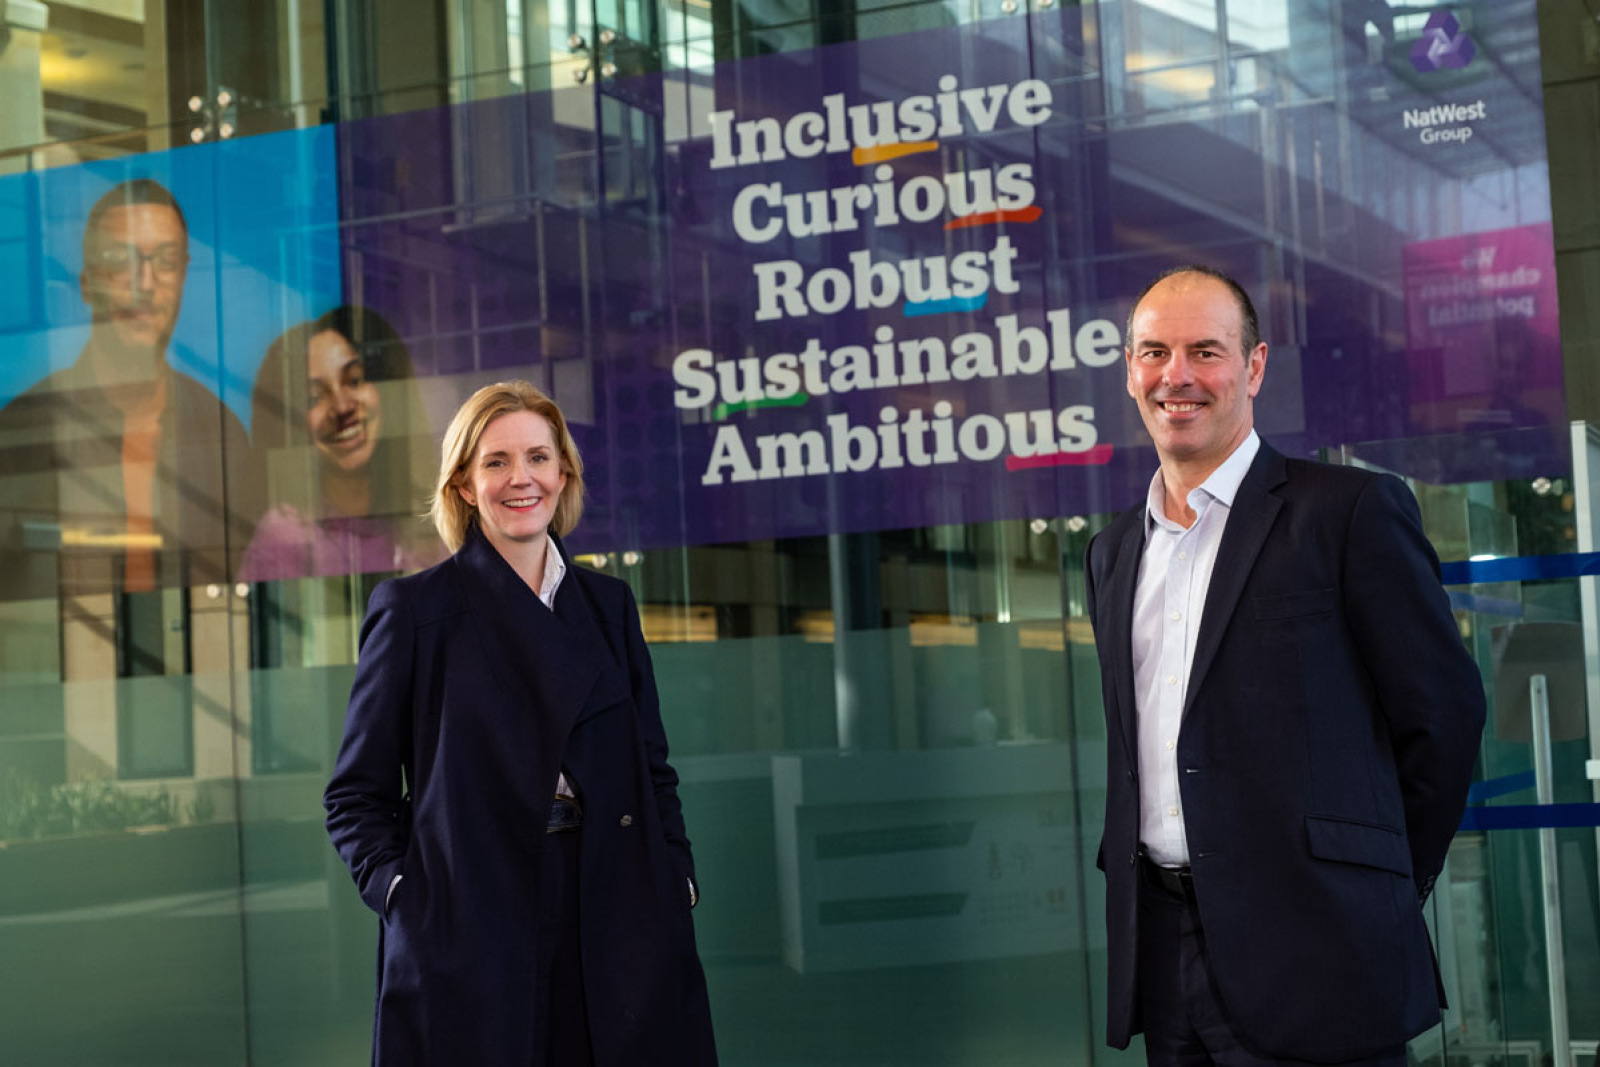 Centre for Business, Climate Change and Sustainability secures £1.5m partnership with NatWest to further climate expertise